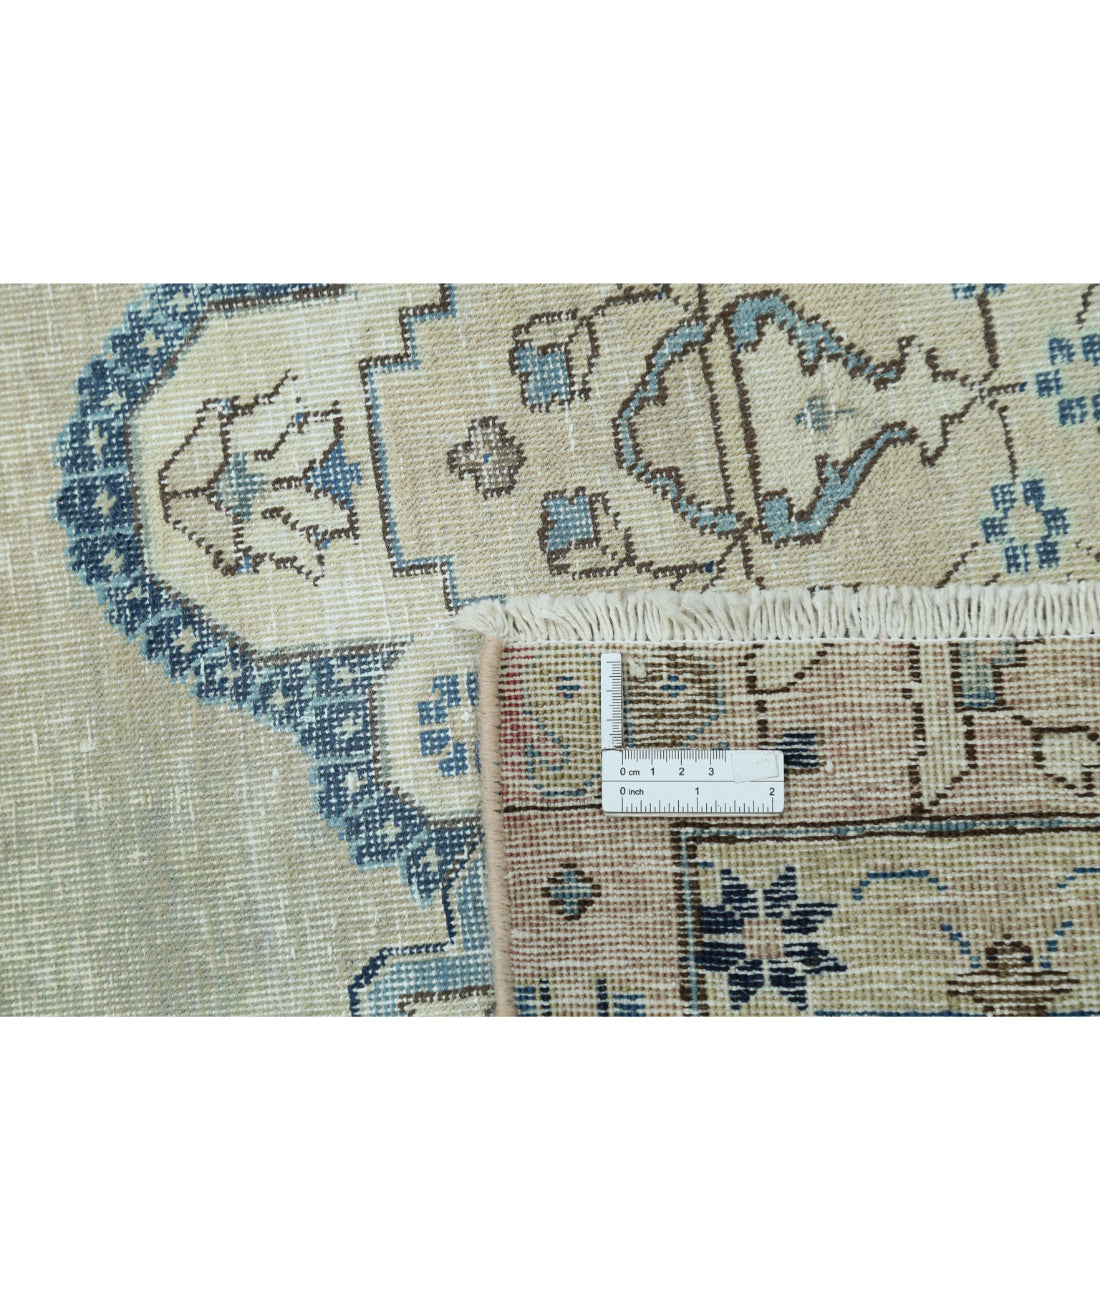 Hand Knotted Vintage Persian Tabriz Wool Rug - 9'8'' x 13'1'' 9'8'' x 13'1'' (290 X 393) / Taupe / Ivory